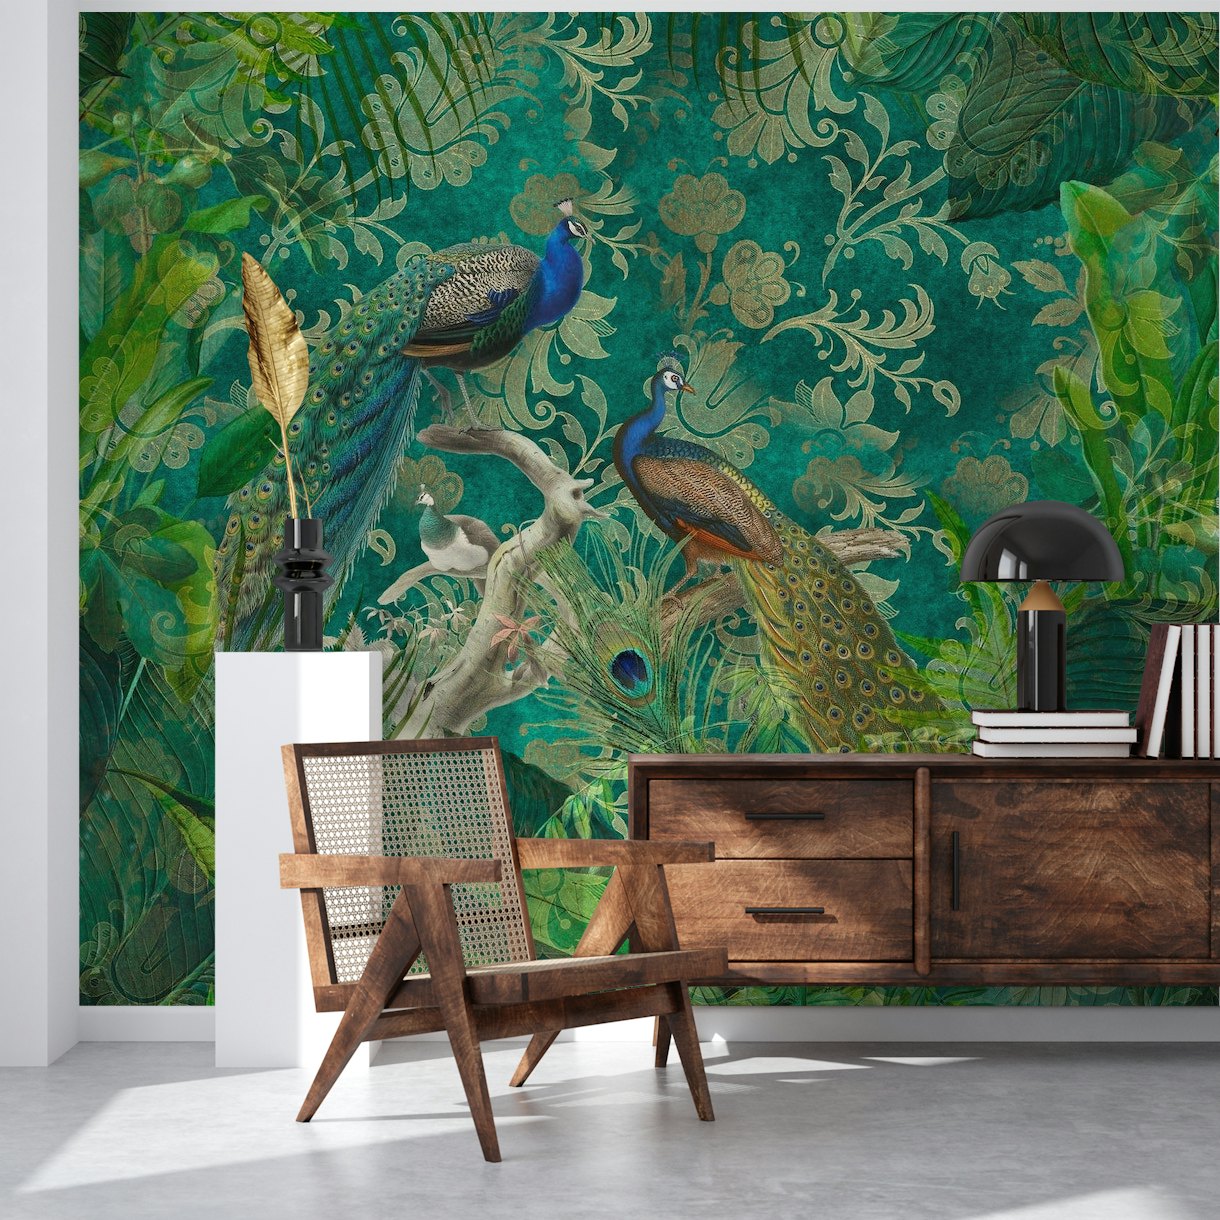 Tropical jungle wallpaper with peacocks and colorful foliage